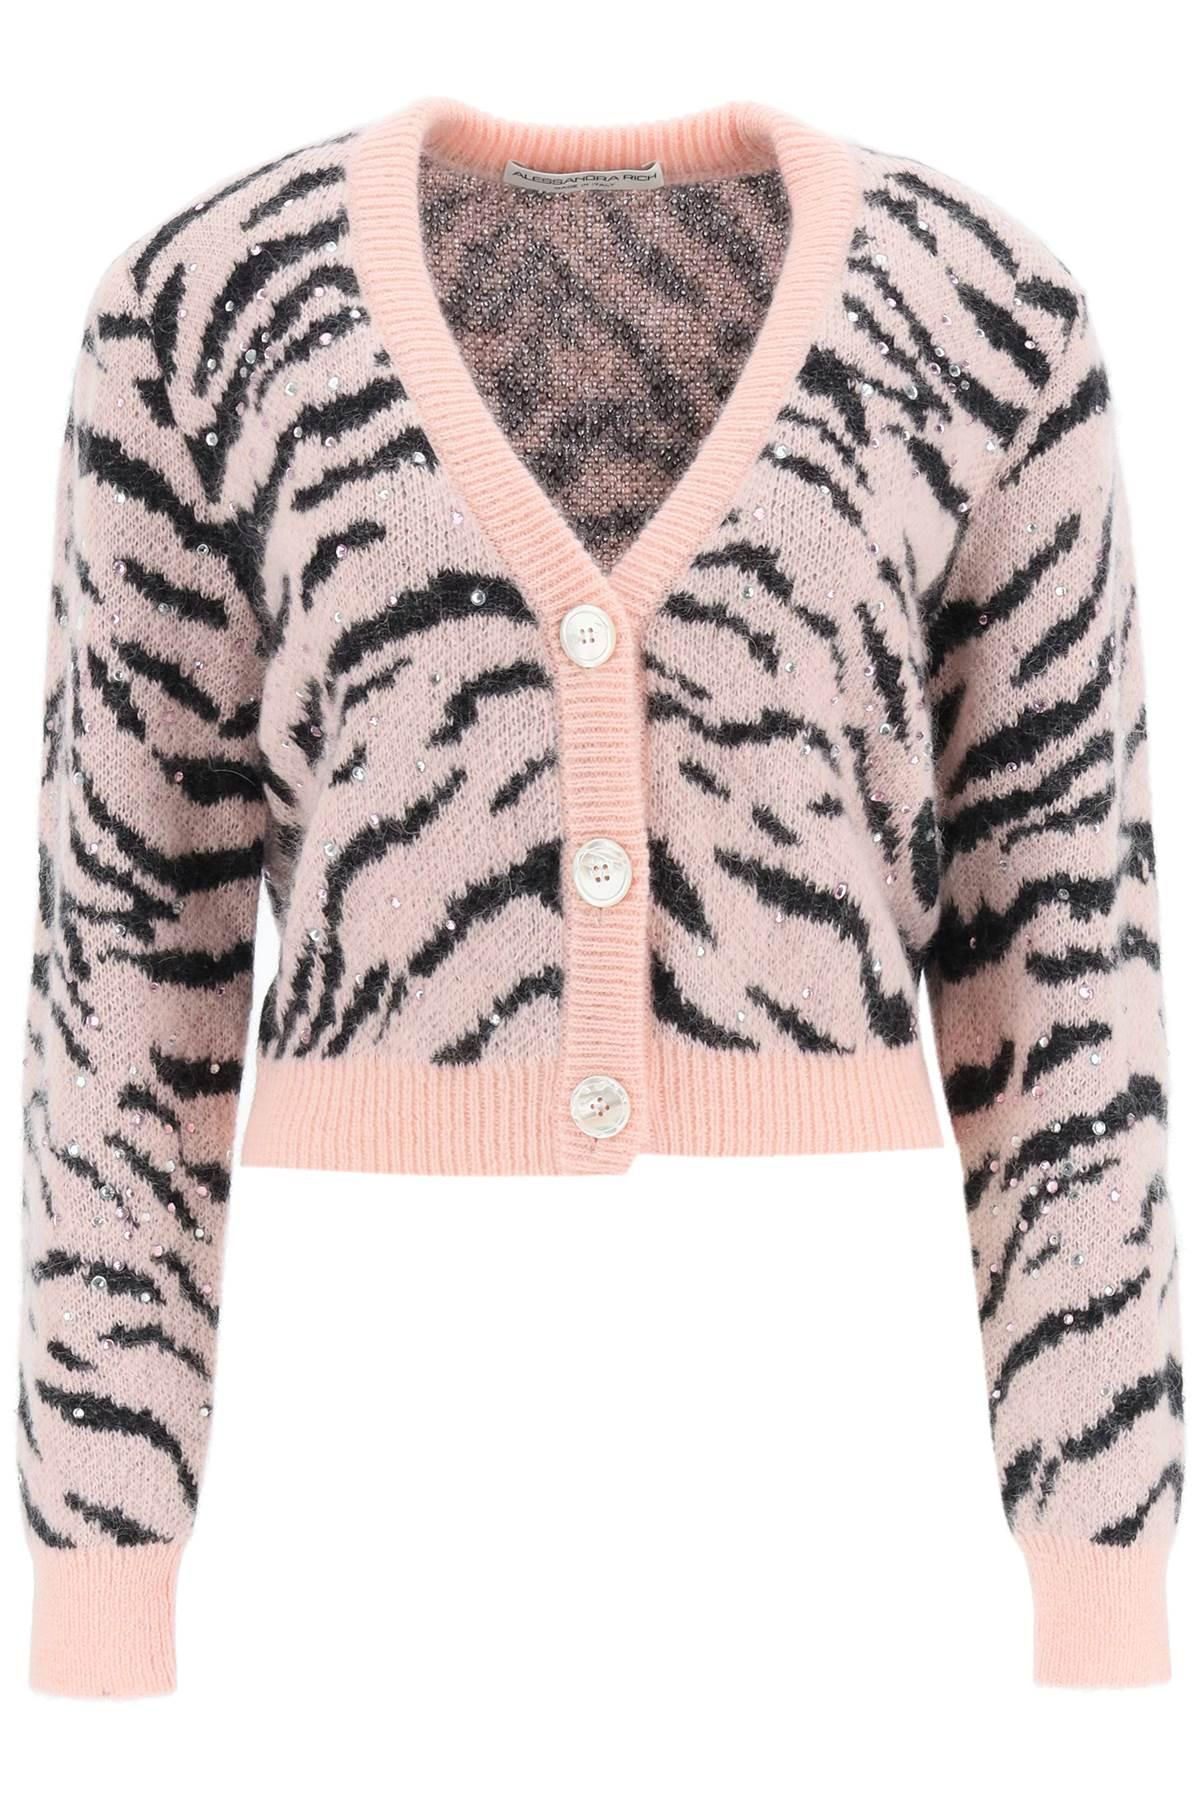 ALESSANDRA RICH CROPPED CARDIGAN WITH ZEBRA MOTIF AND CRYSTALS